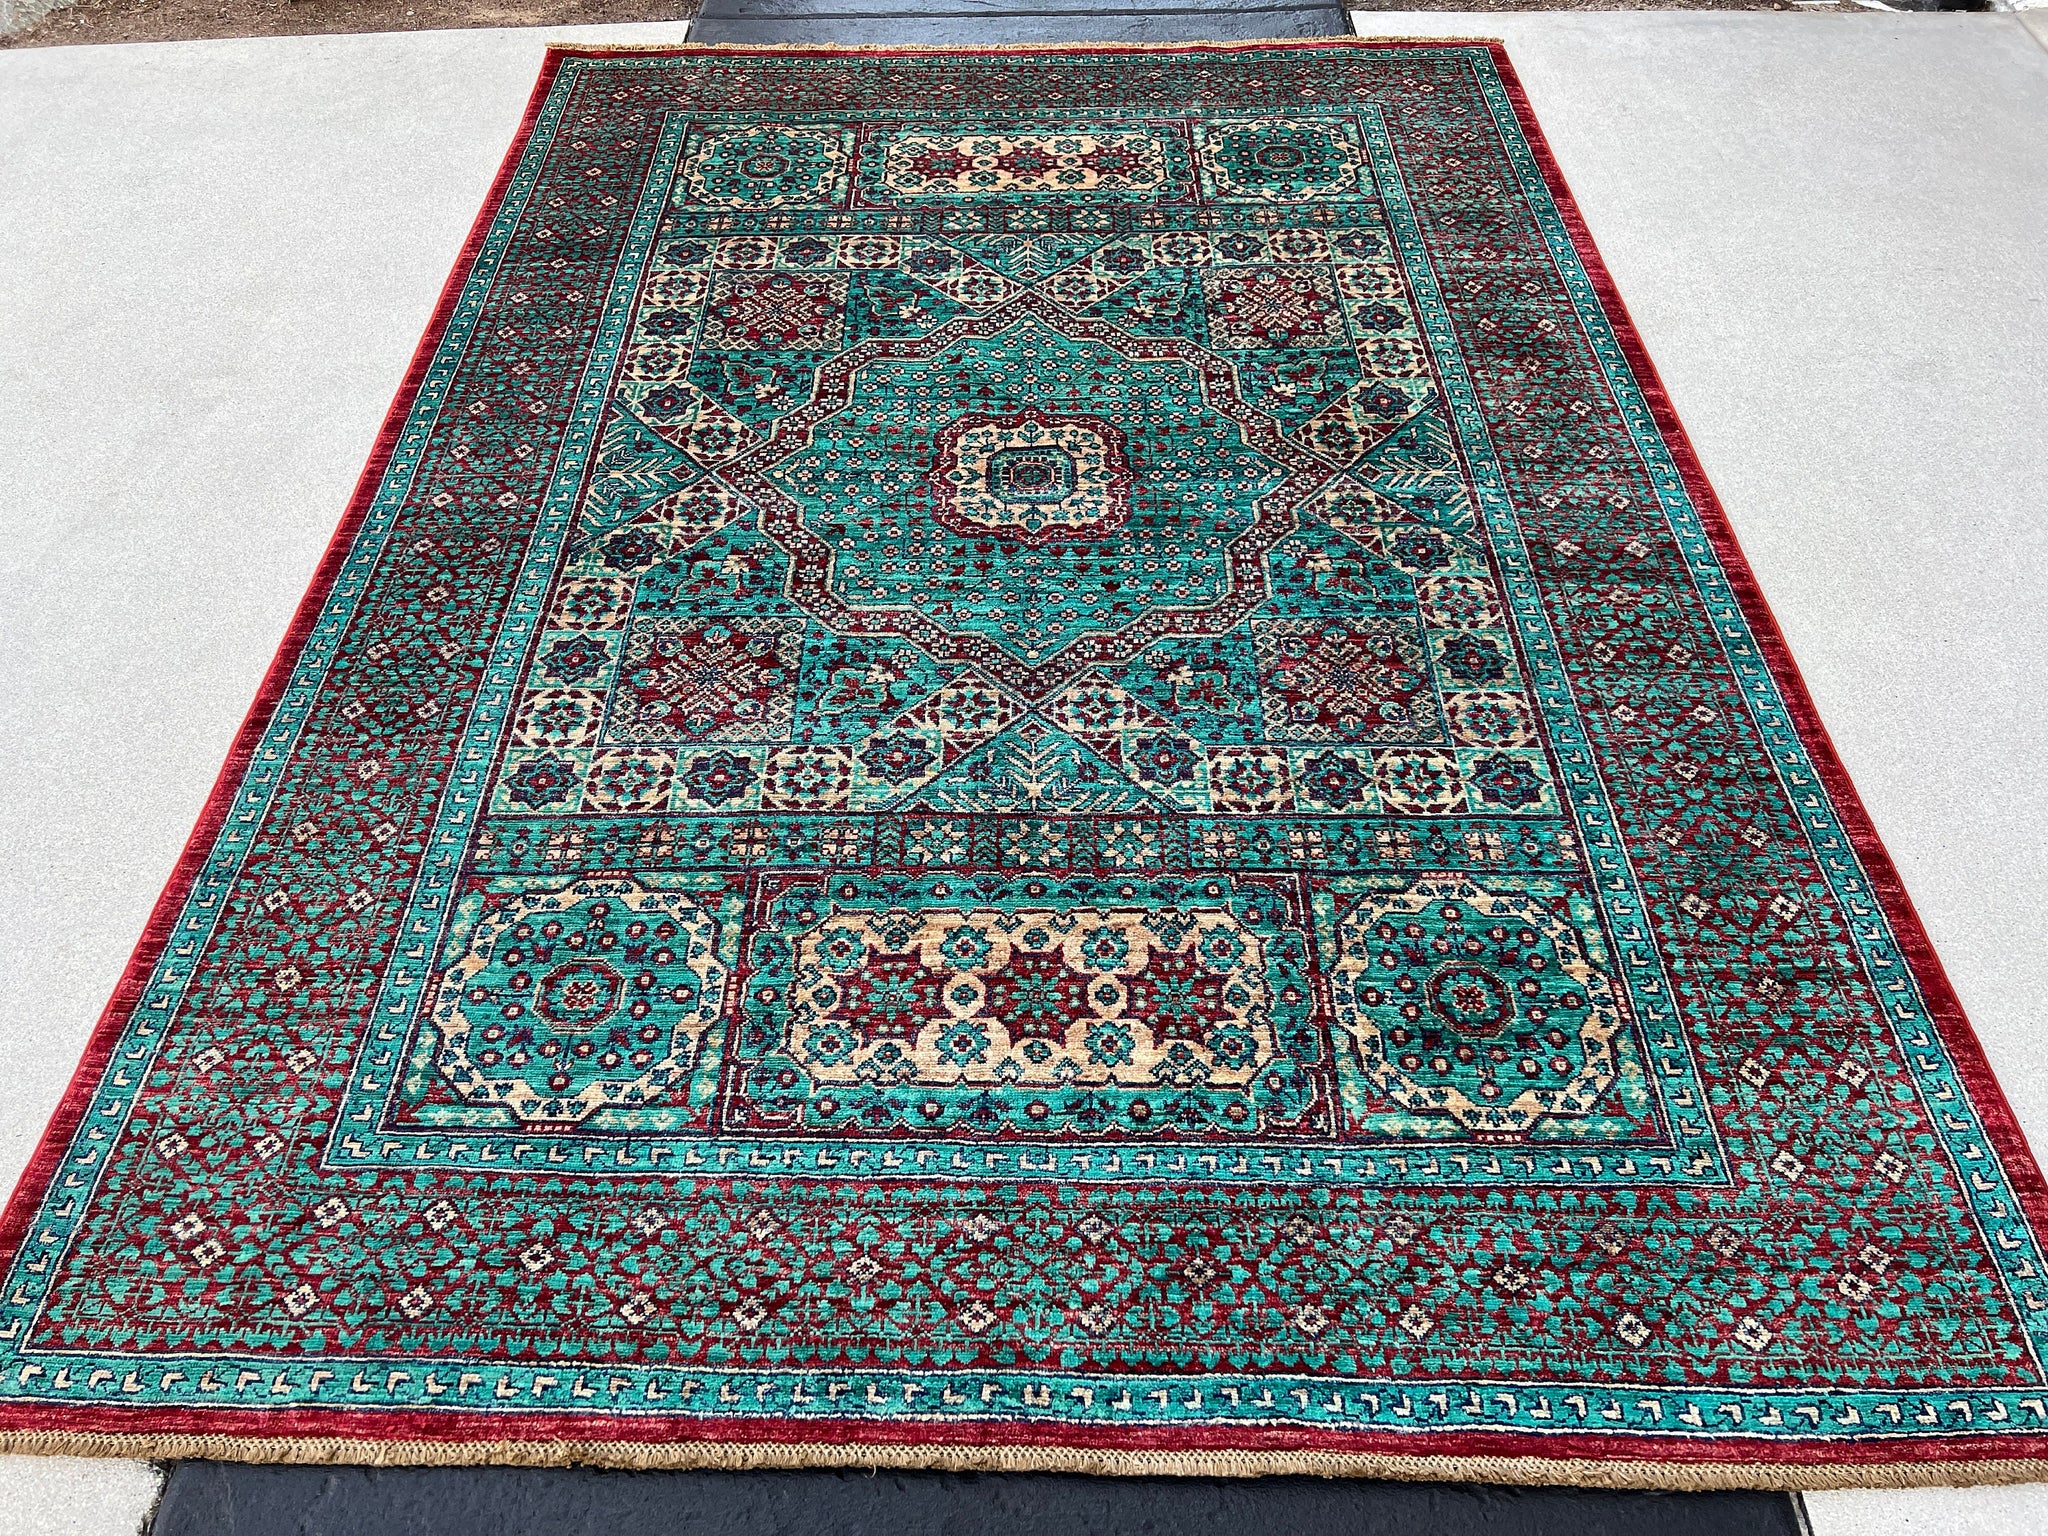 6x8 (180x245) Fair Trade Handmade Afghan Rug | Turquoise Cherry Red Ivory Blue Golden Brown | Hand Knotted Oriental Turkish Wool Oushak Boho